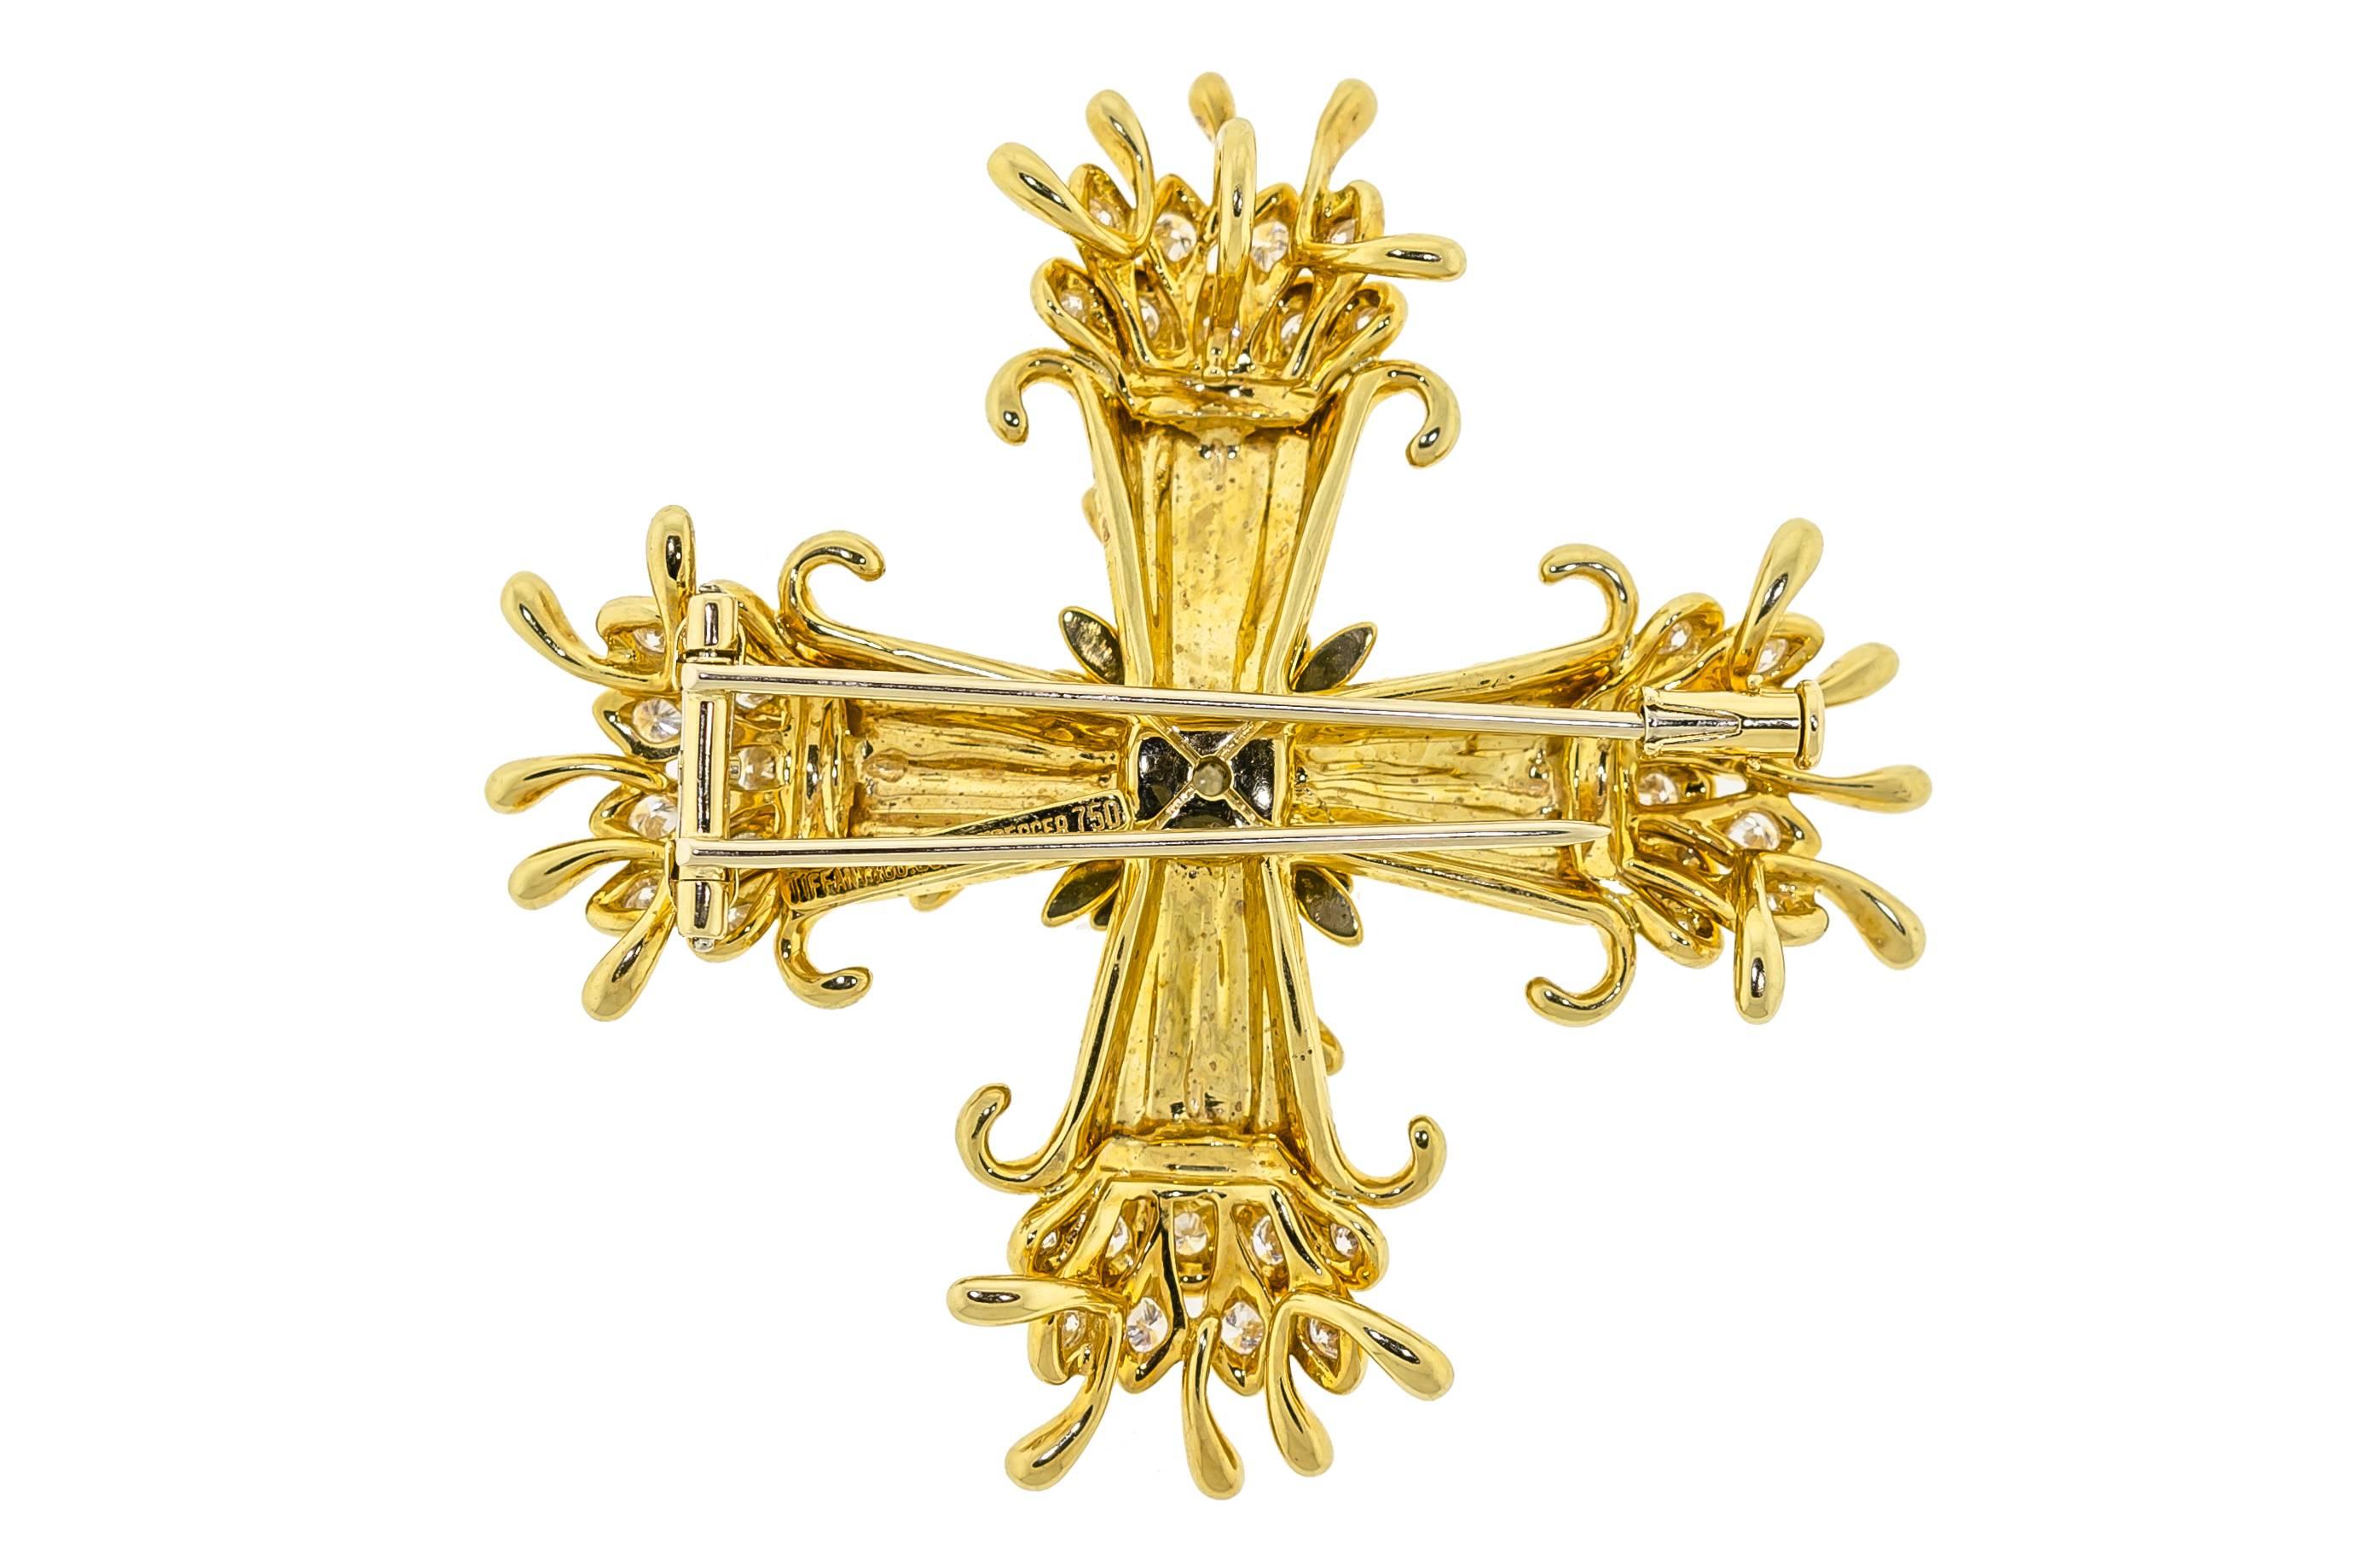 An 18 Karat Yellow Gold and Diamond Maltese Cross Pendant/Brooch, Schlumberger for Tiffany & Co., consisting of a polished cruciform base with freeform wirework accents, containing 37 round brilliant cut diamonds weighing approximately 1.25-1.30